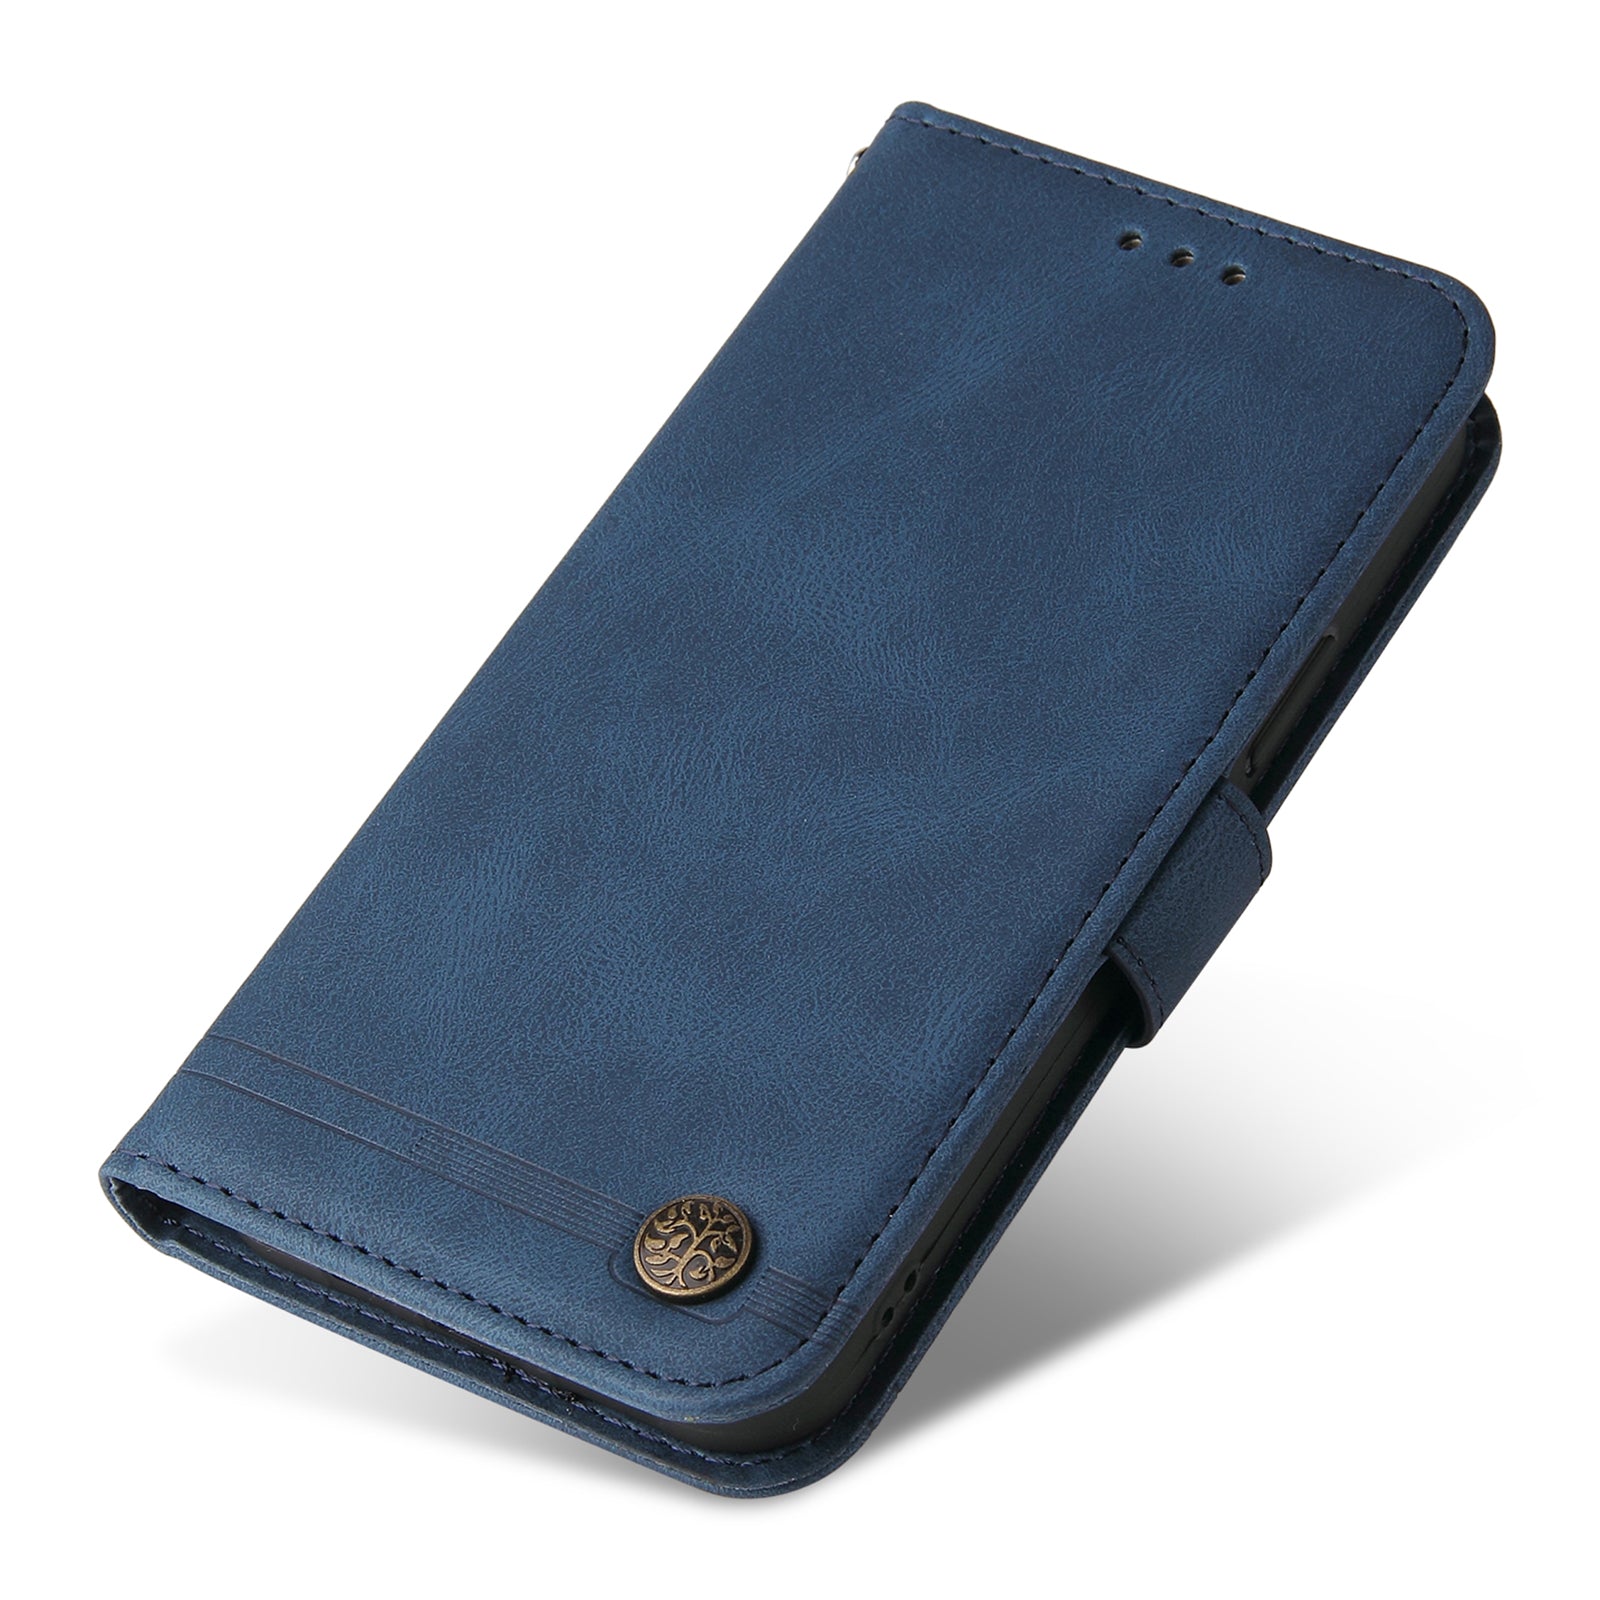 For vivo Y200e 5G / Y100 5G (Indonesia) / T3 5G (India) / V30 Lite 5G (India) Skin-touch Case Imprinted with Lines - Blue